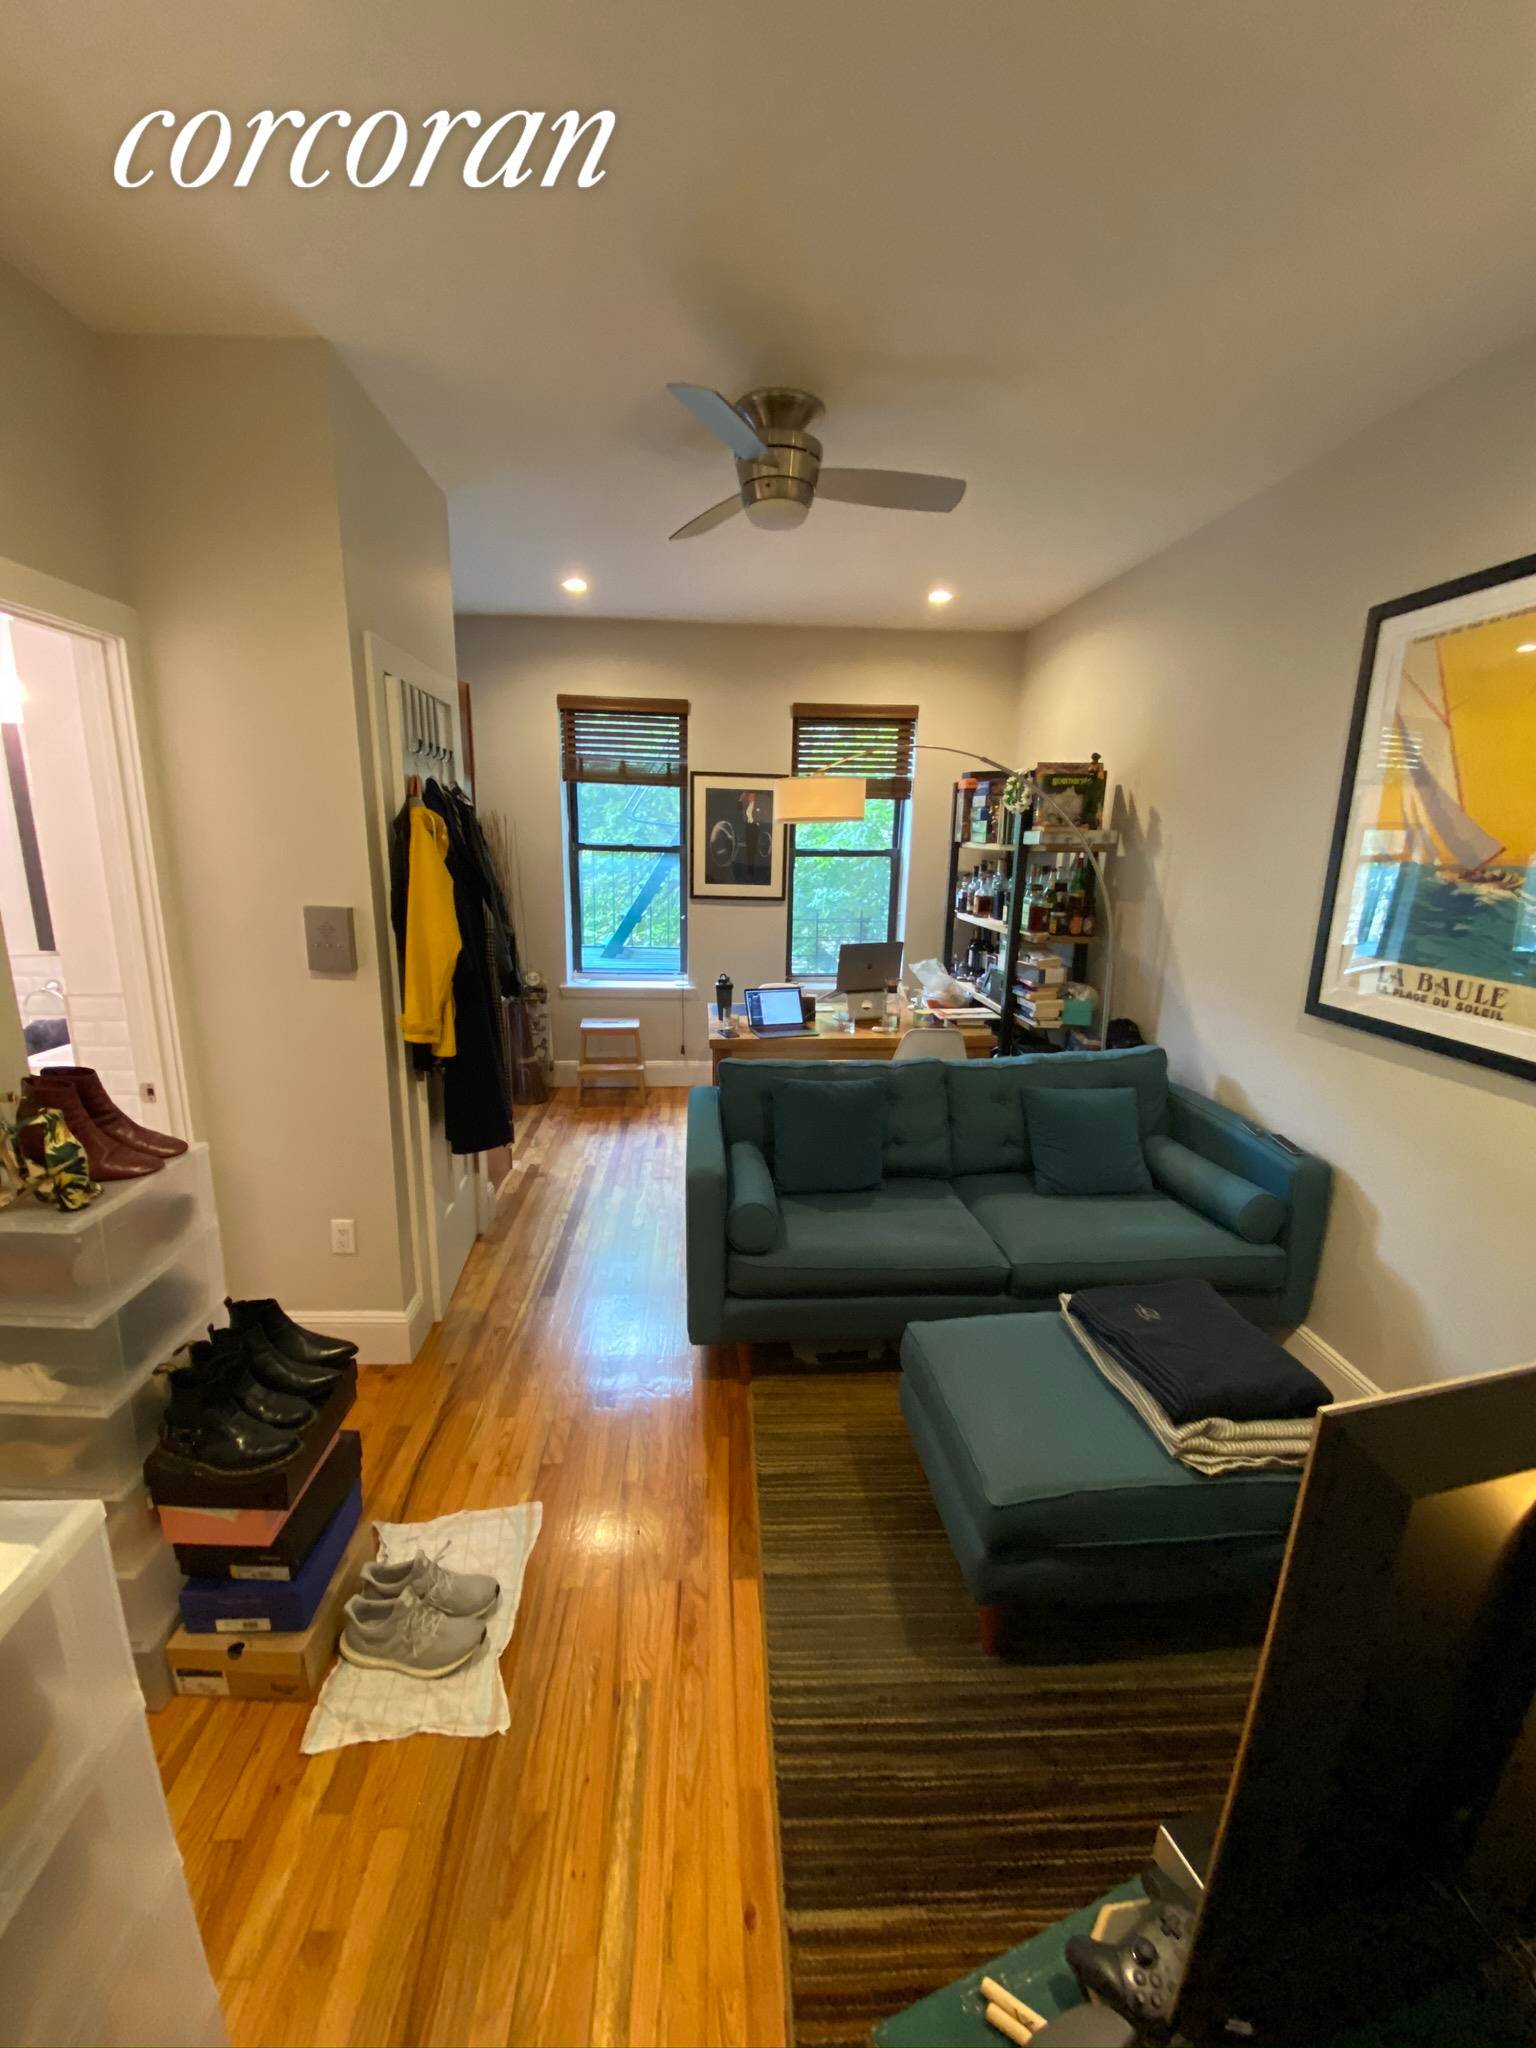 Large 1 Bedroom apartment with south and north exposures.